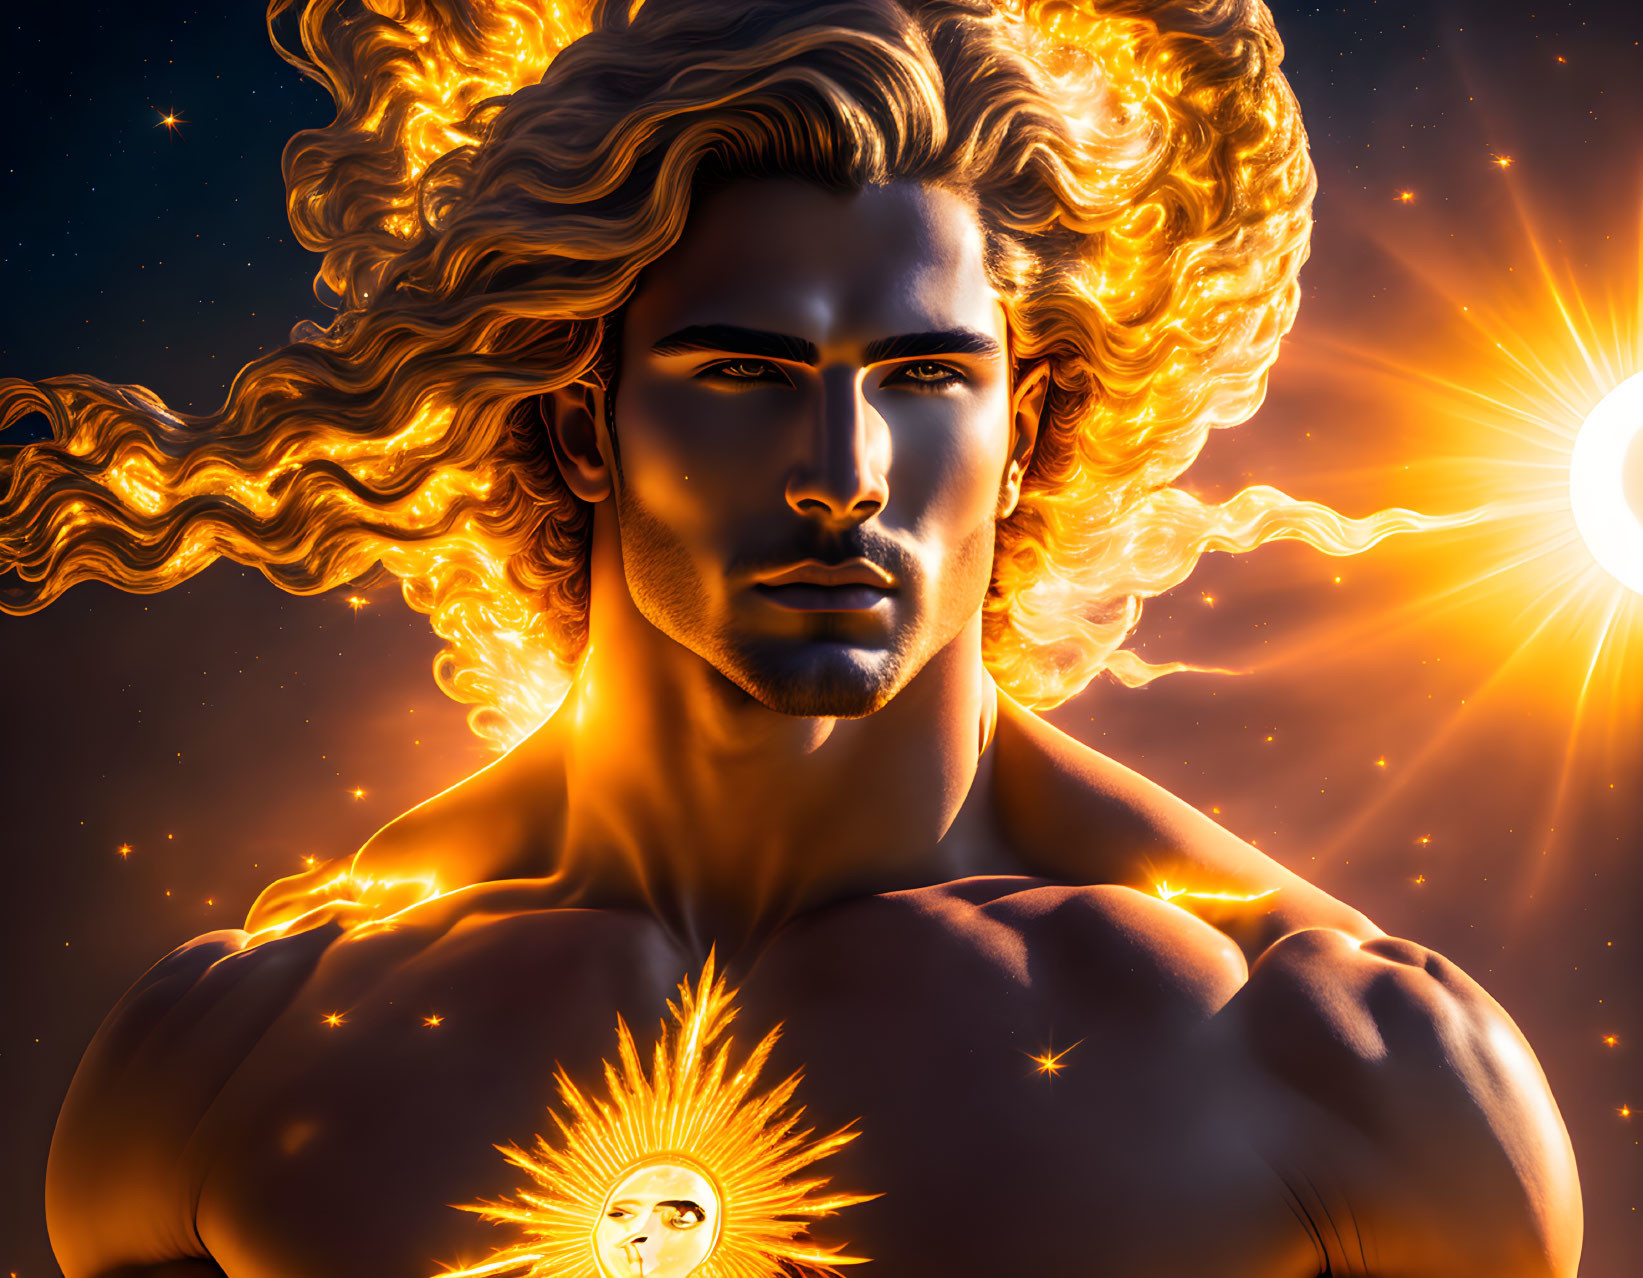 Mythical male figure with golden hair in cosmic setting